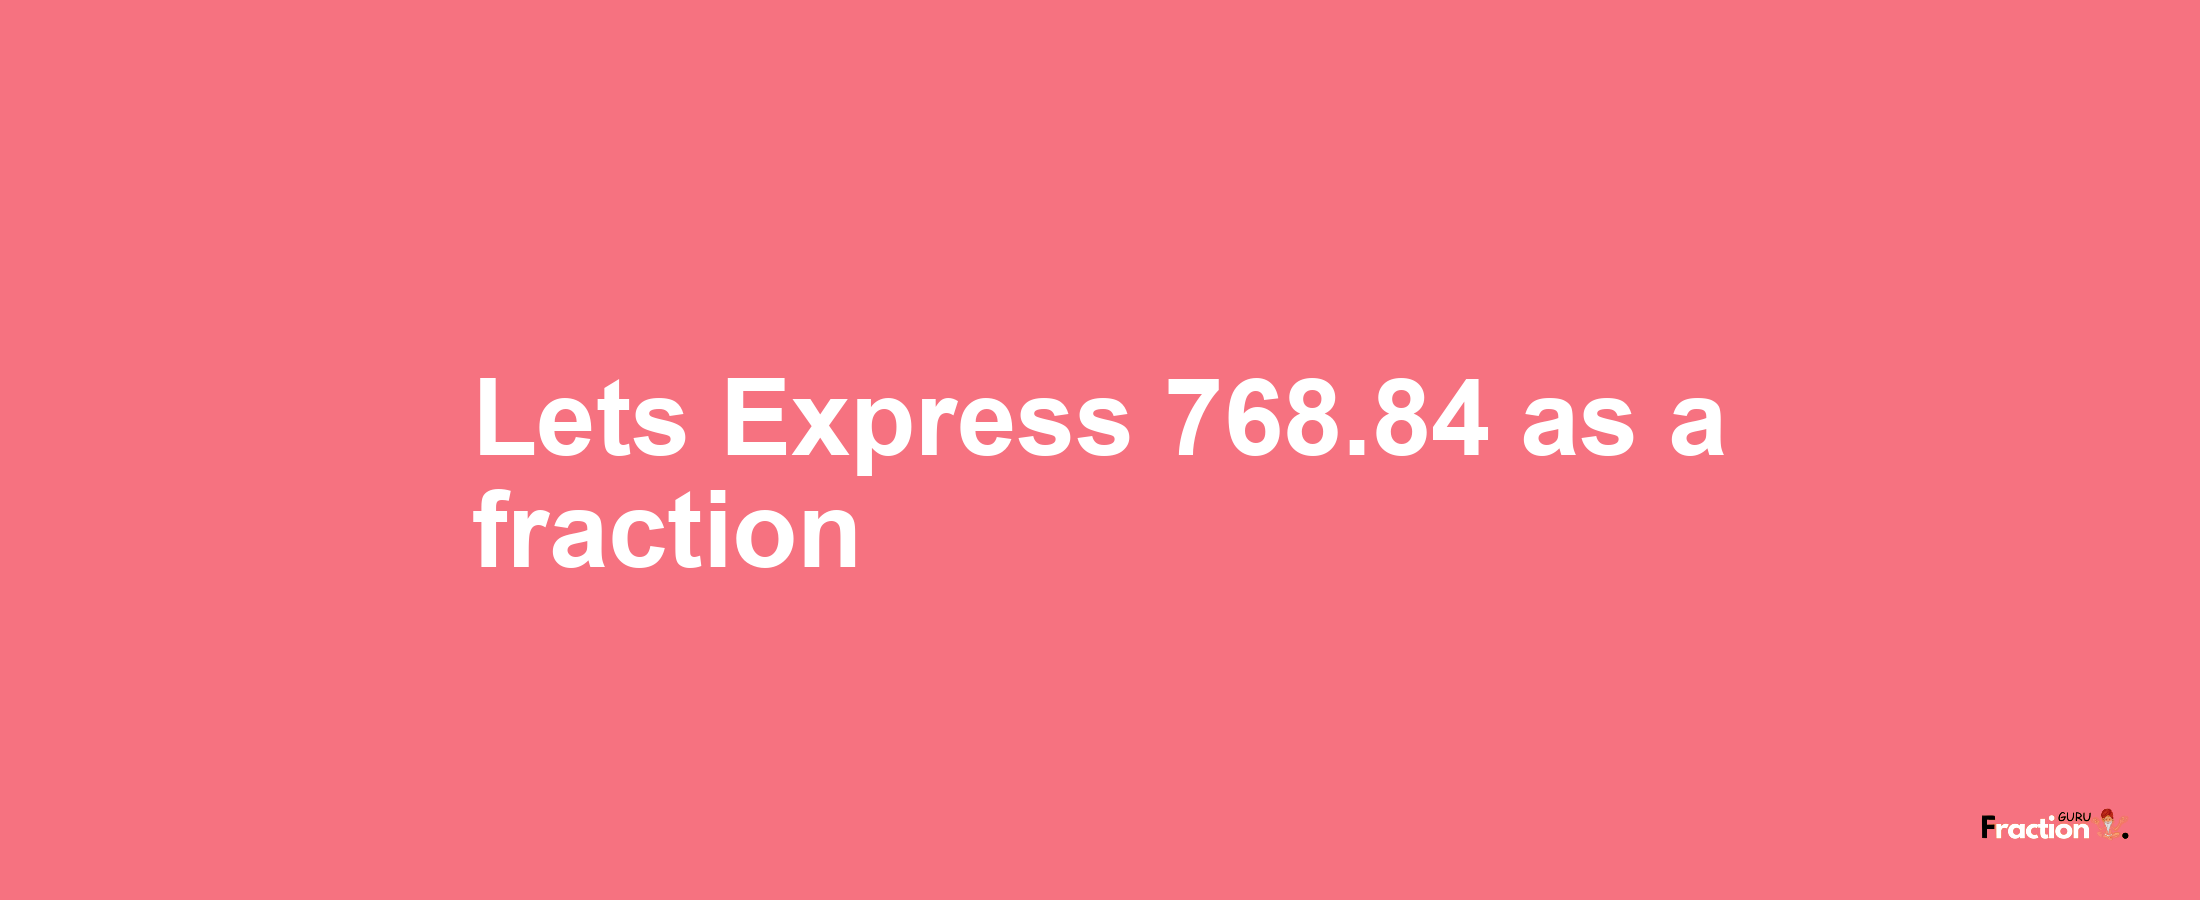 Lets Express 768.84 as afraction